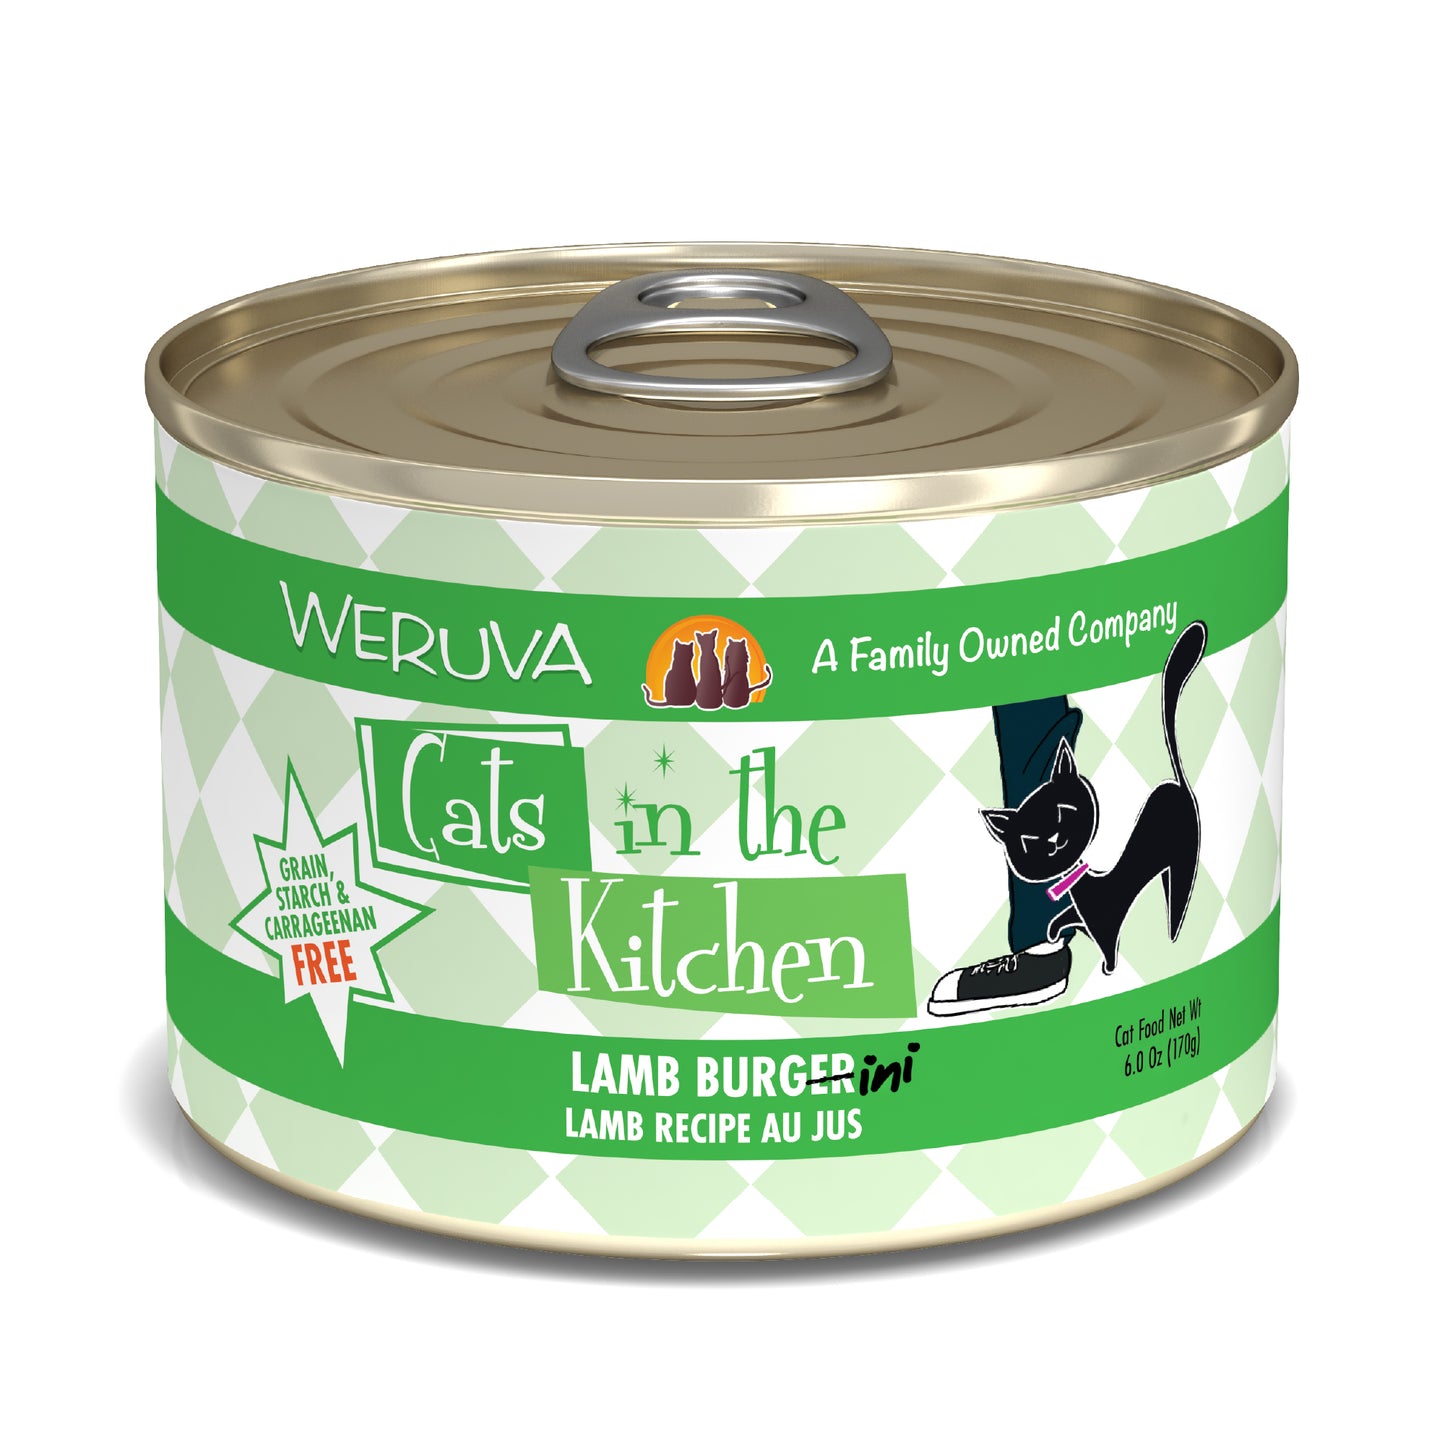 Weruva Cats in the Kitchen 6oz Canned Cat Food Lamb Burgini